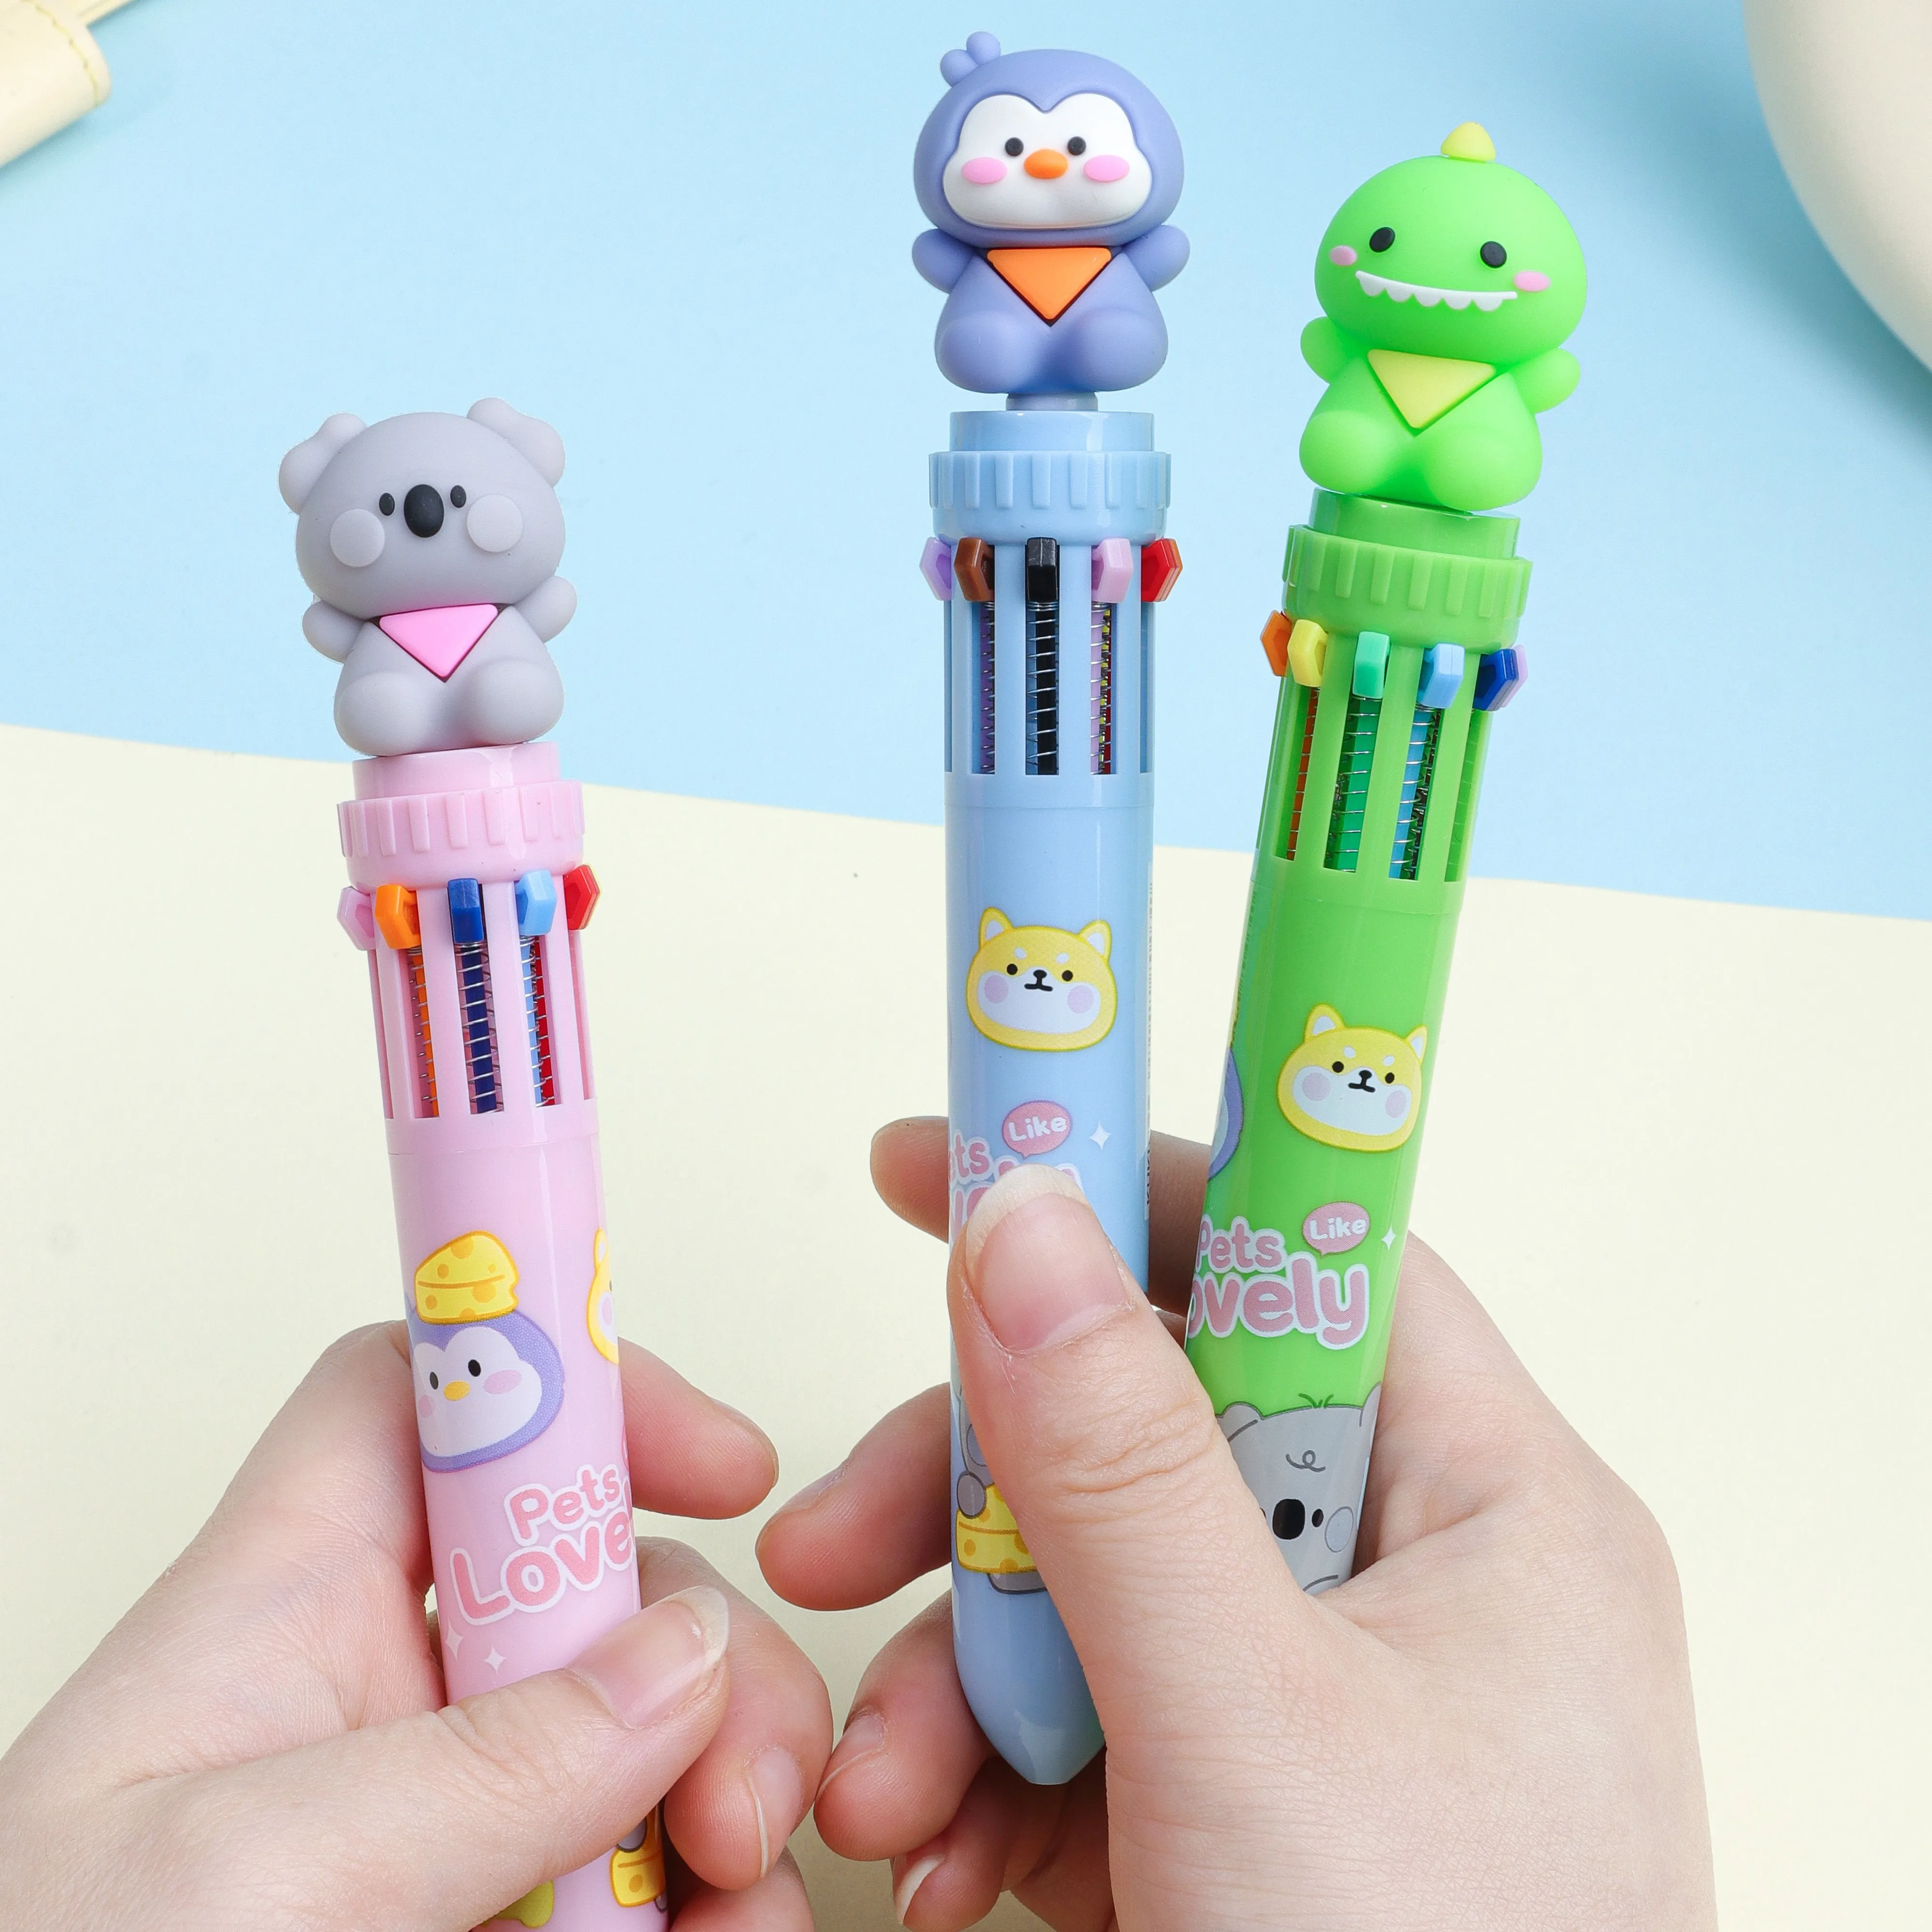 Cute Animals Cute Pet Styling 10 Colors Ballpoint Pen Pens For Scrapbook Journals Or Drawing